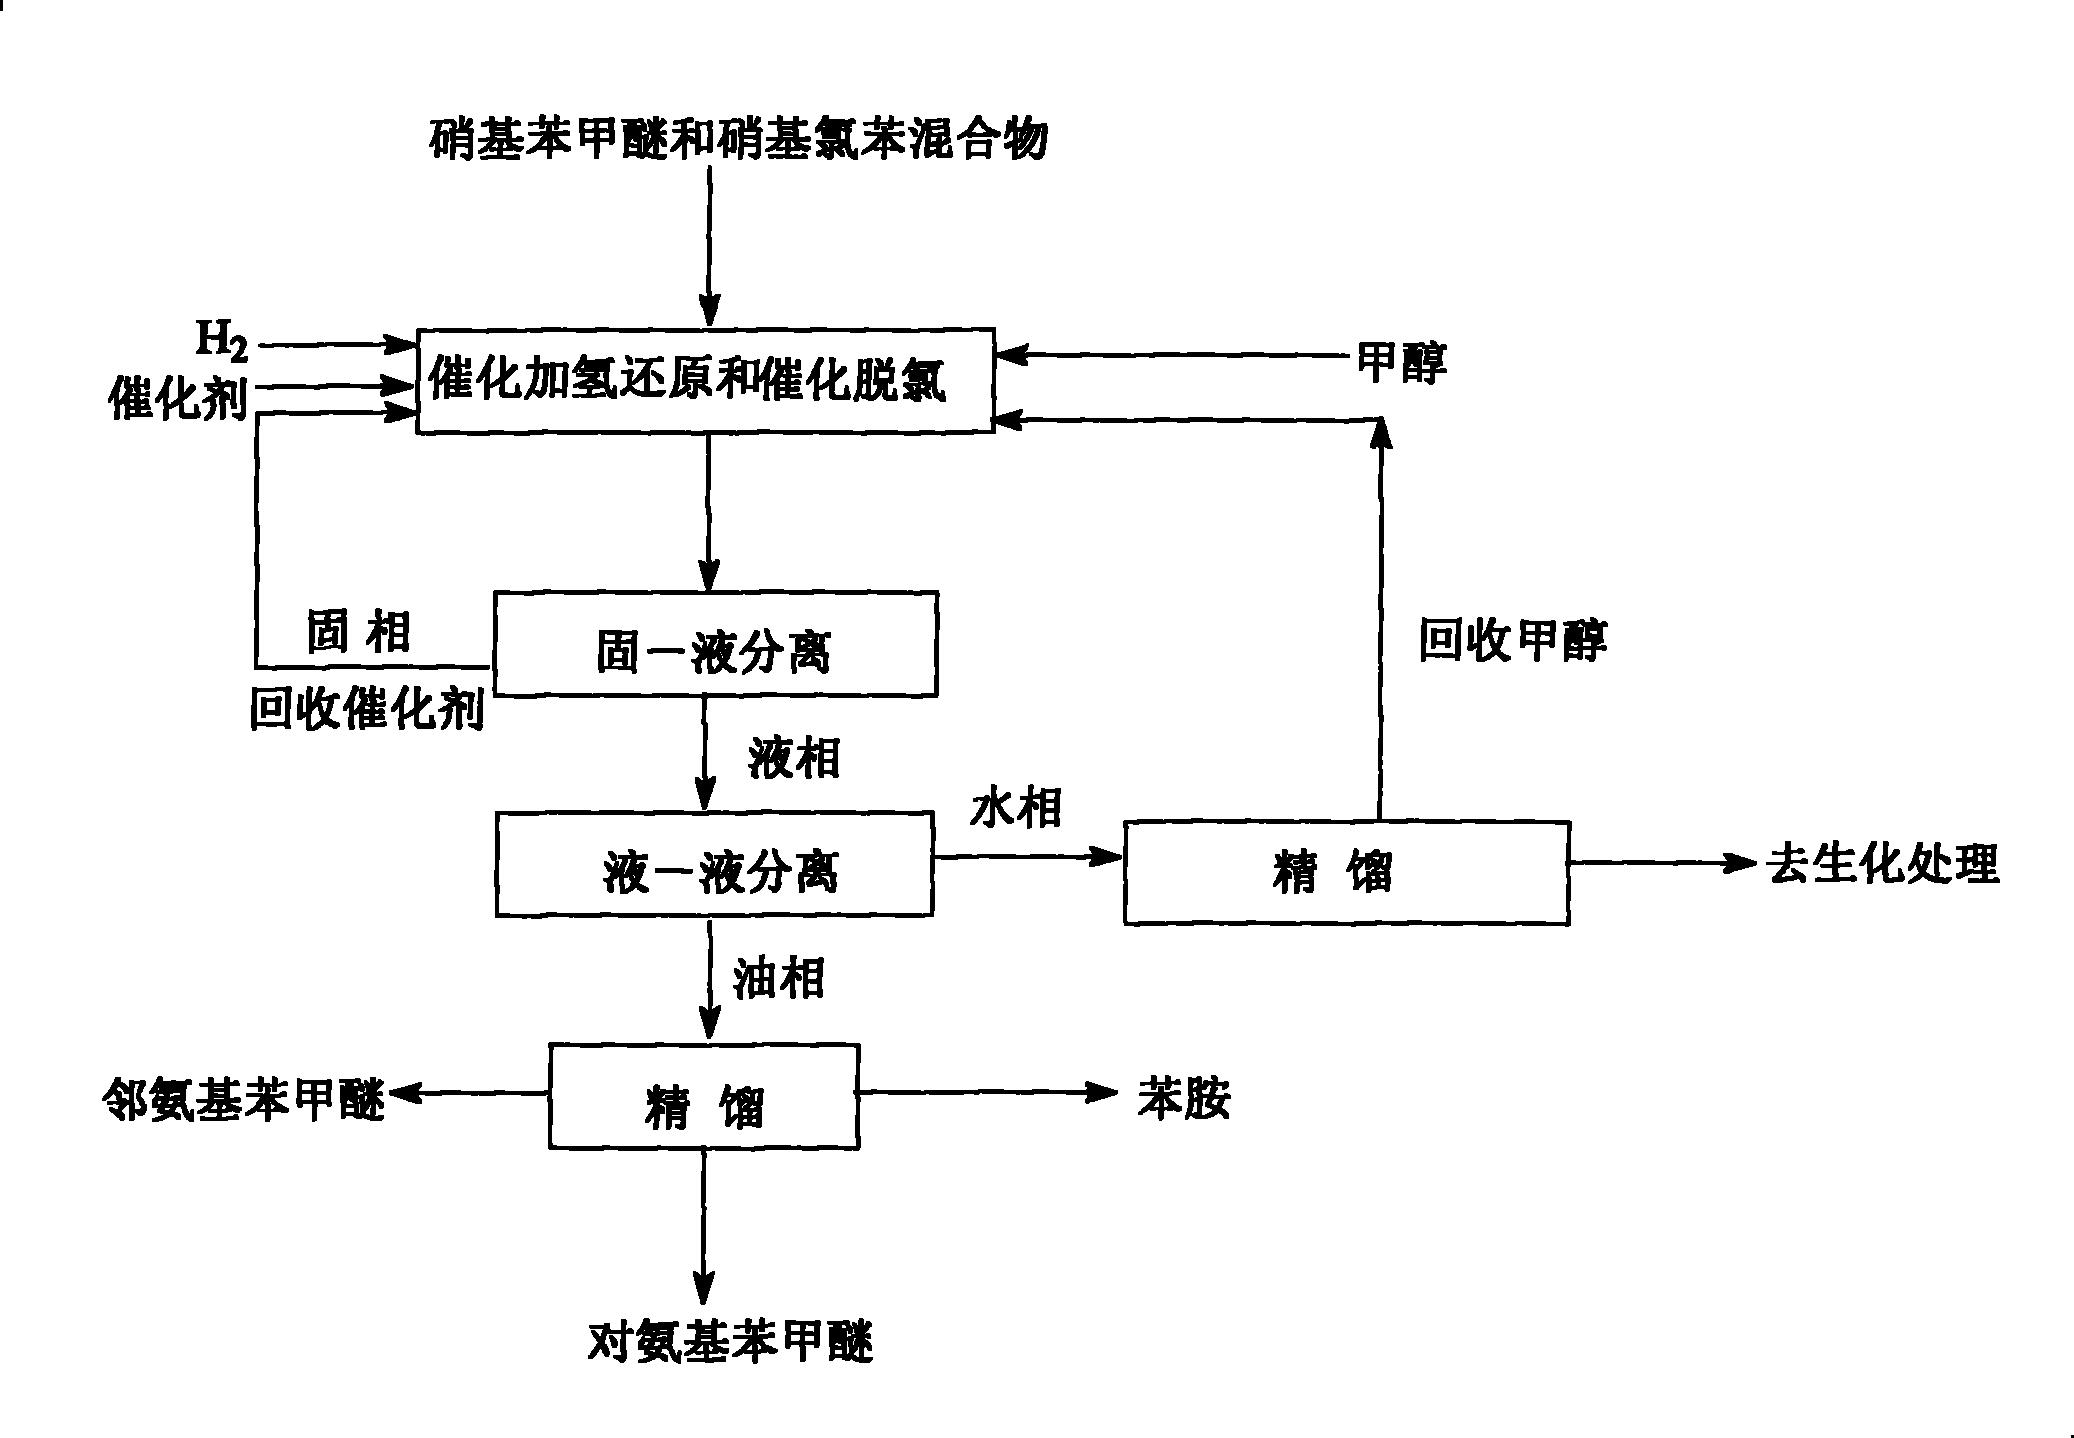 Process for preparing aminoanisol and aniline by using mixture of nitroanisole and nitro chlorobenzene as raw materials